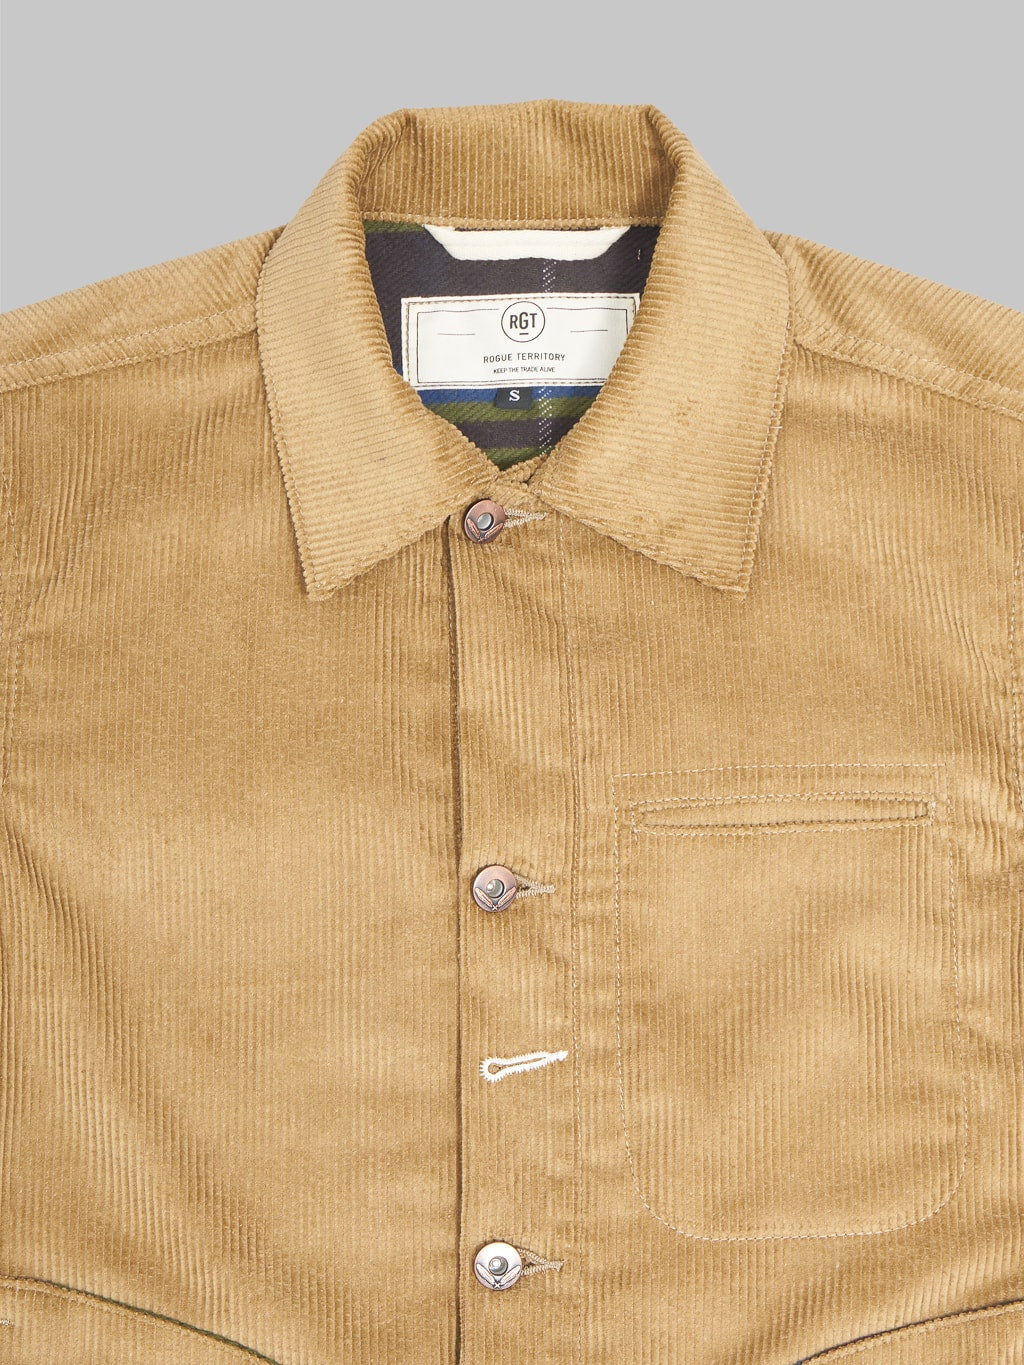 Rogue Territory Supply Jacket Lined Tan Corduroy chest